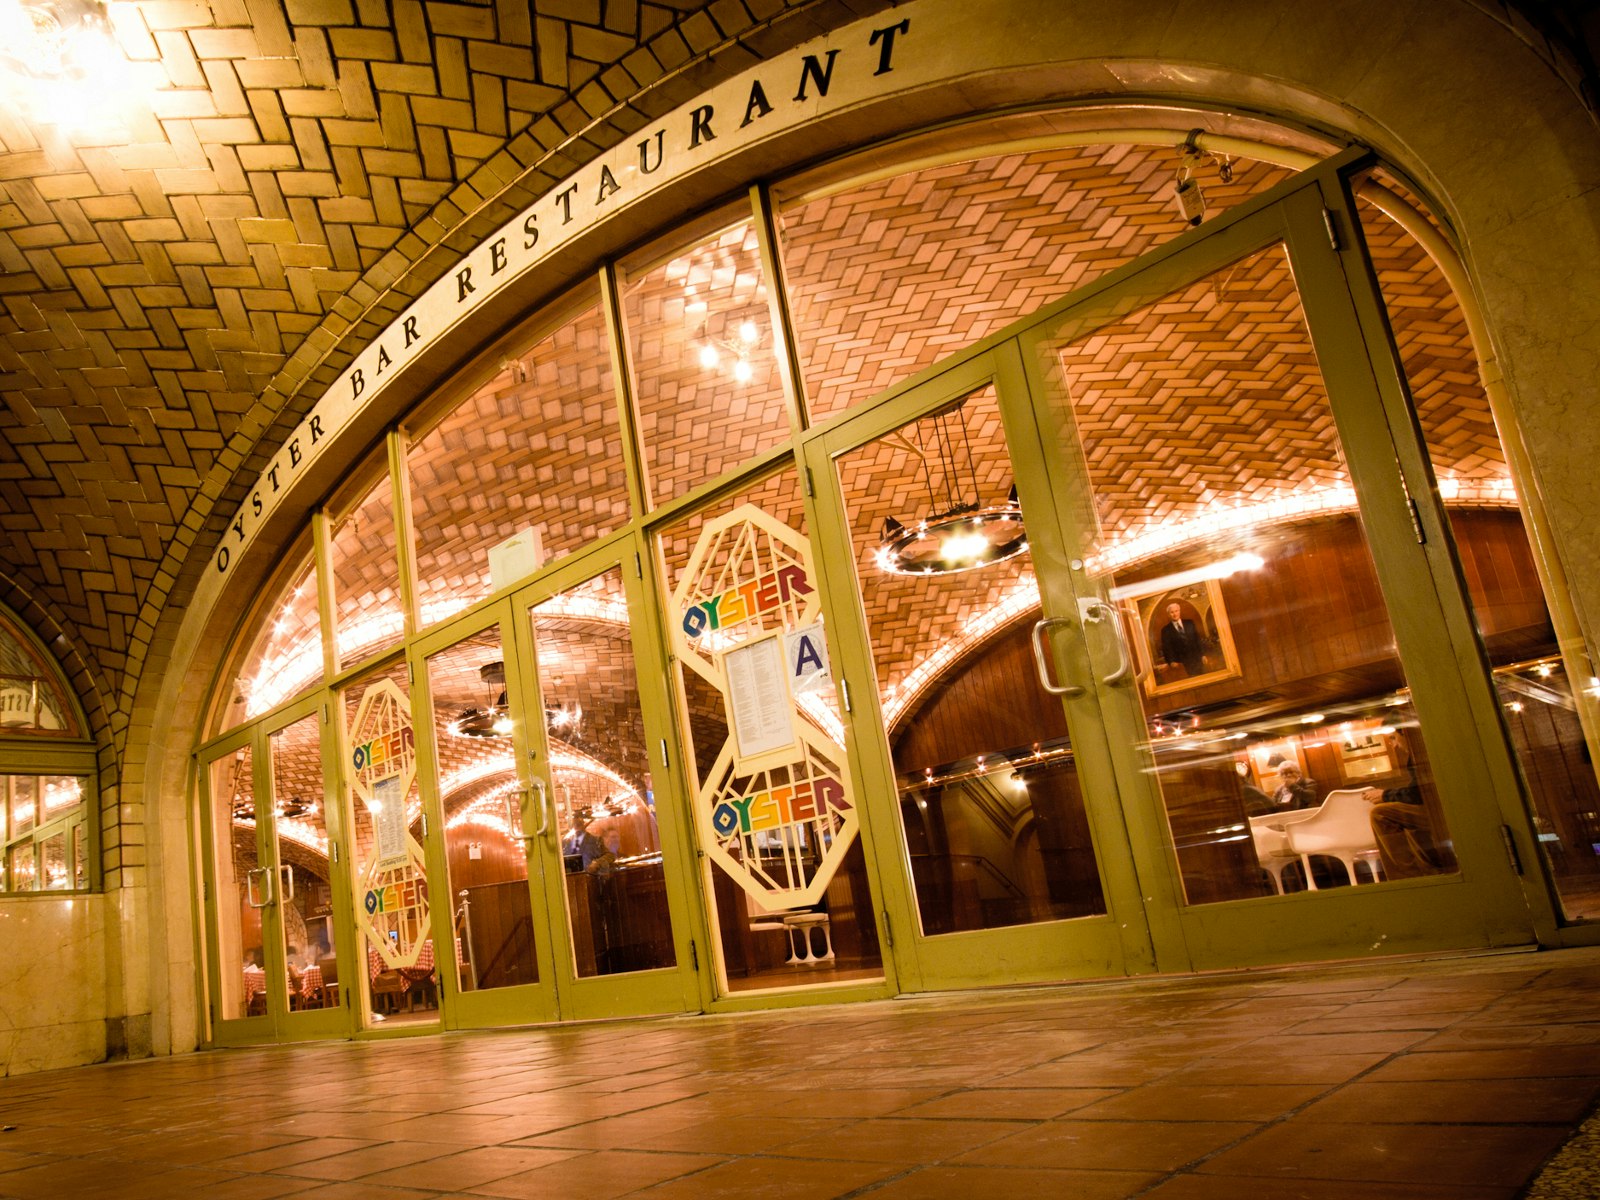 The entrance to New York's iconic Grand Central Oyster Bar